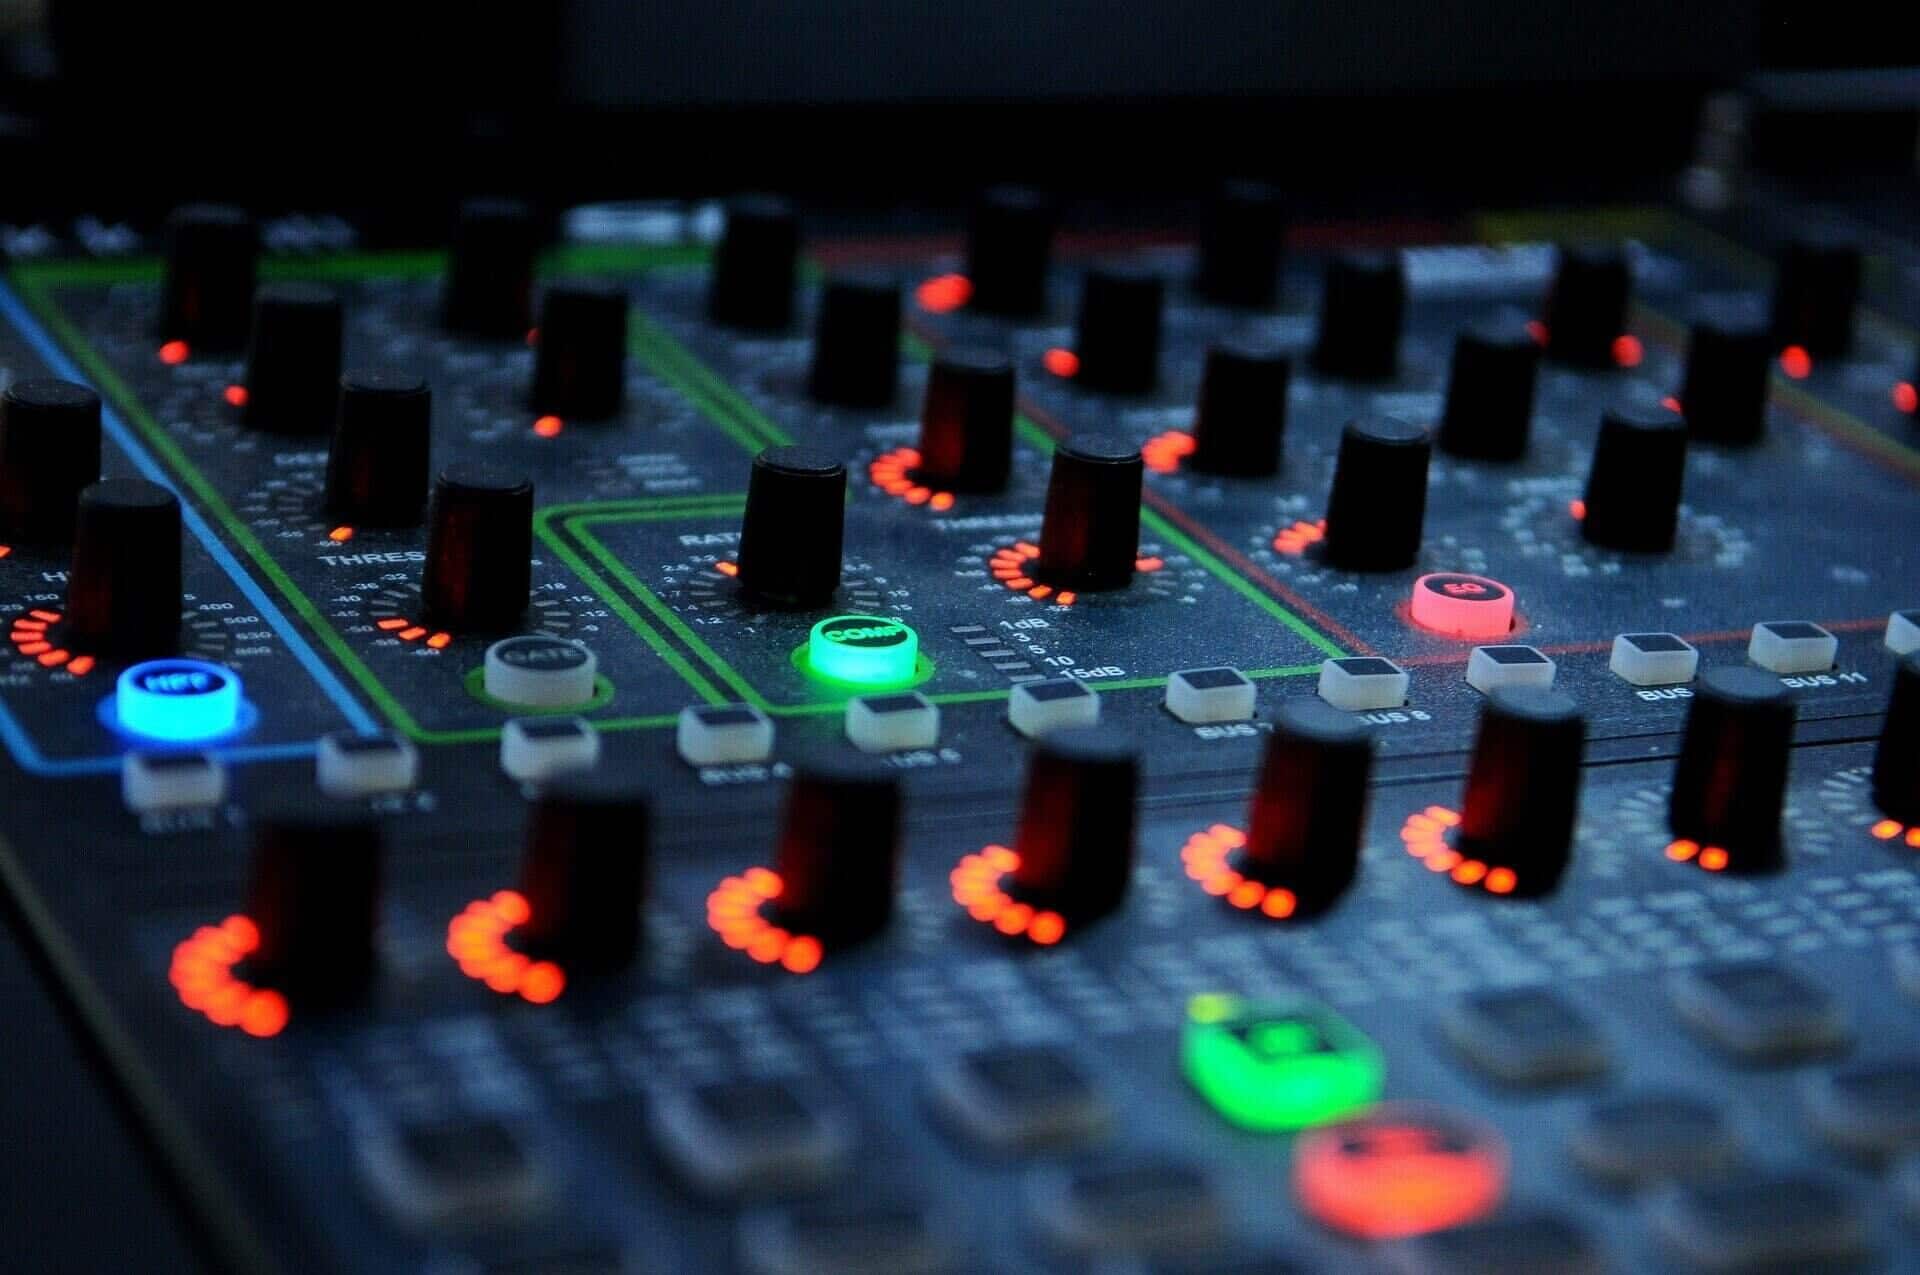 ðŸ¥‡ Best Mixer for Streaming in 2021 - Top 5 Products and Reviews